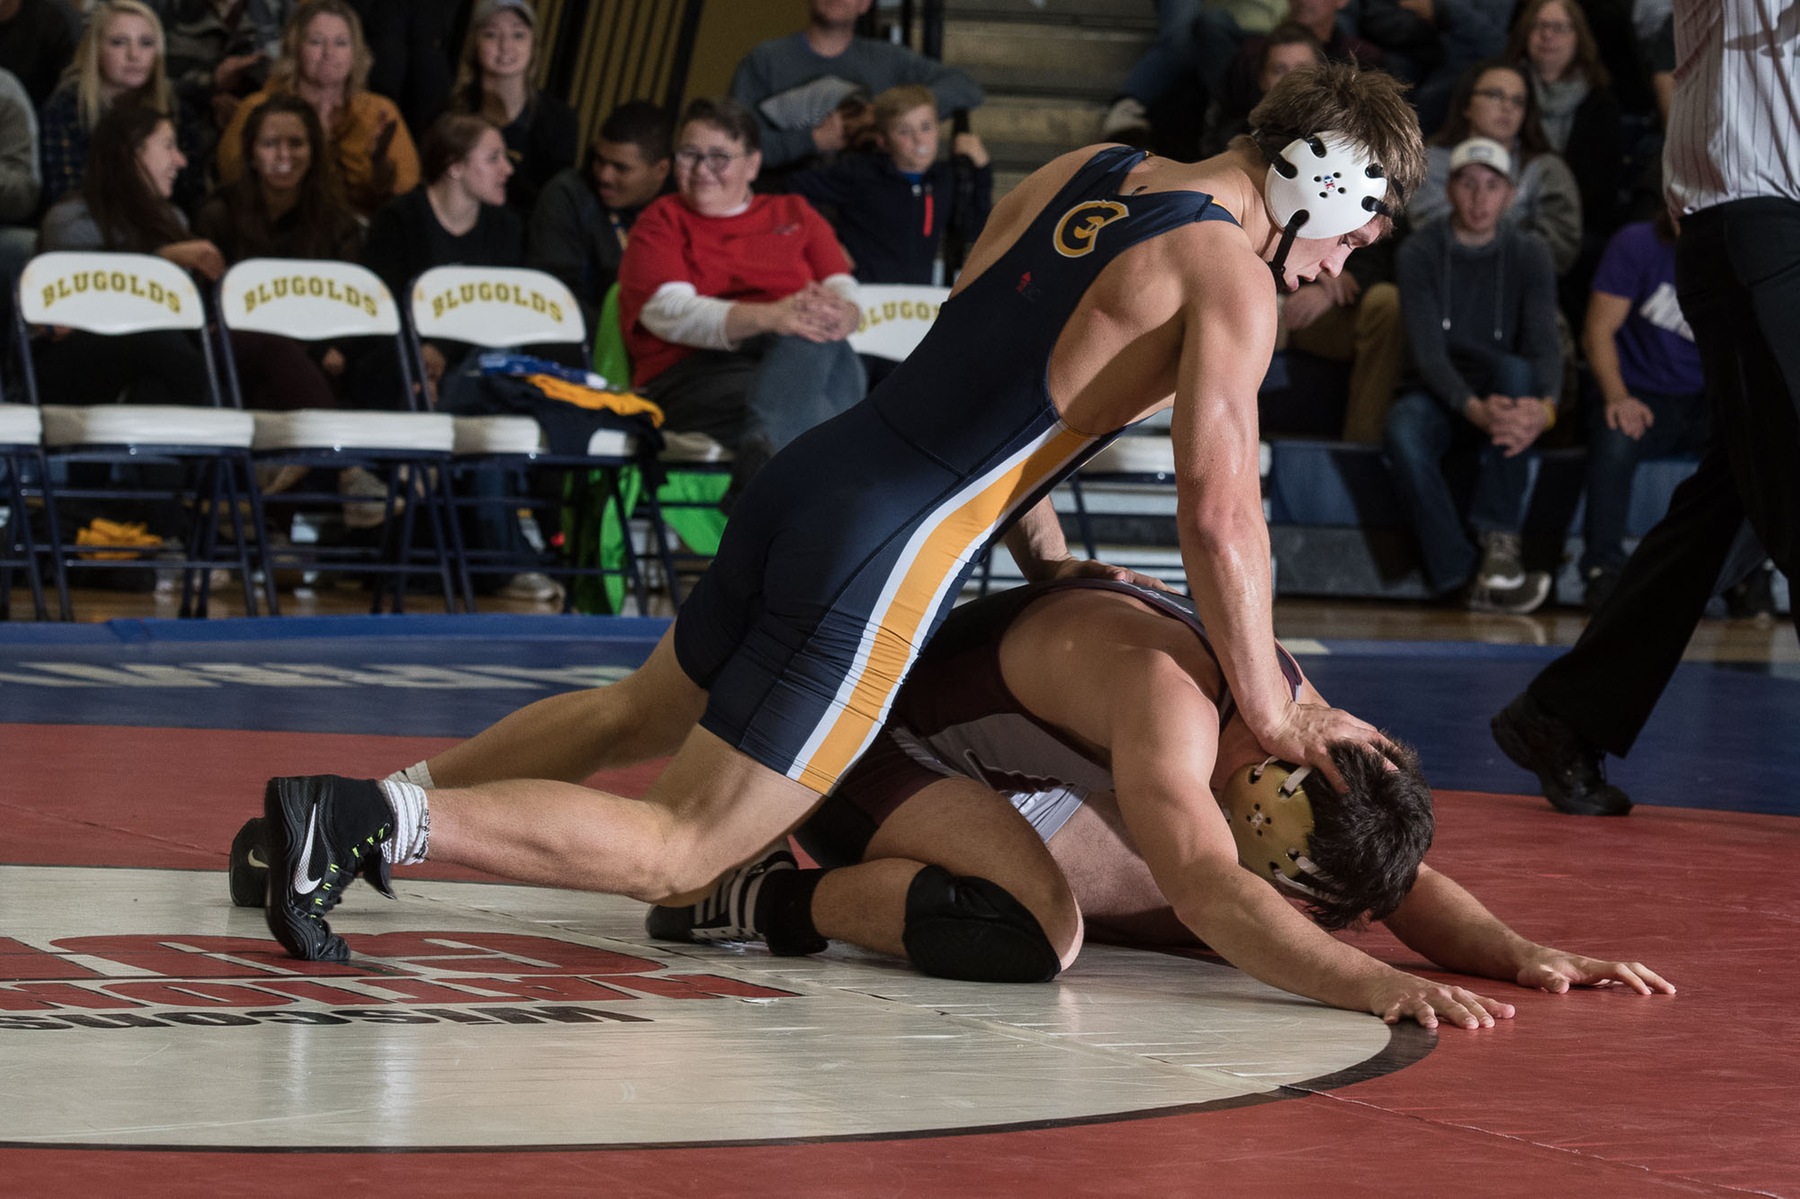 Four wrestlers advance to day two of Regional Tournament